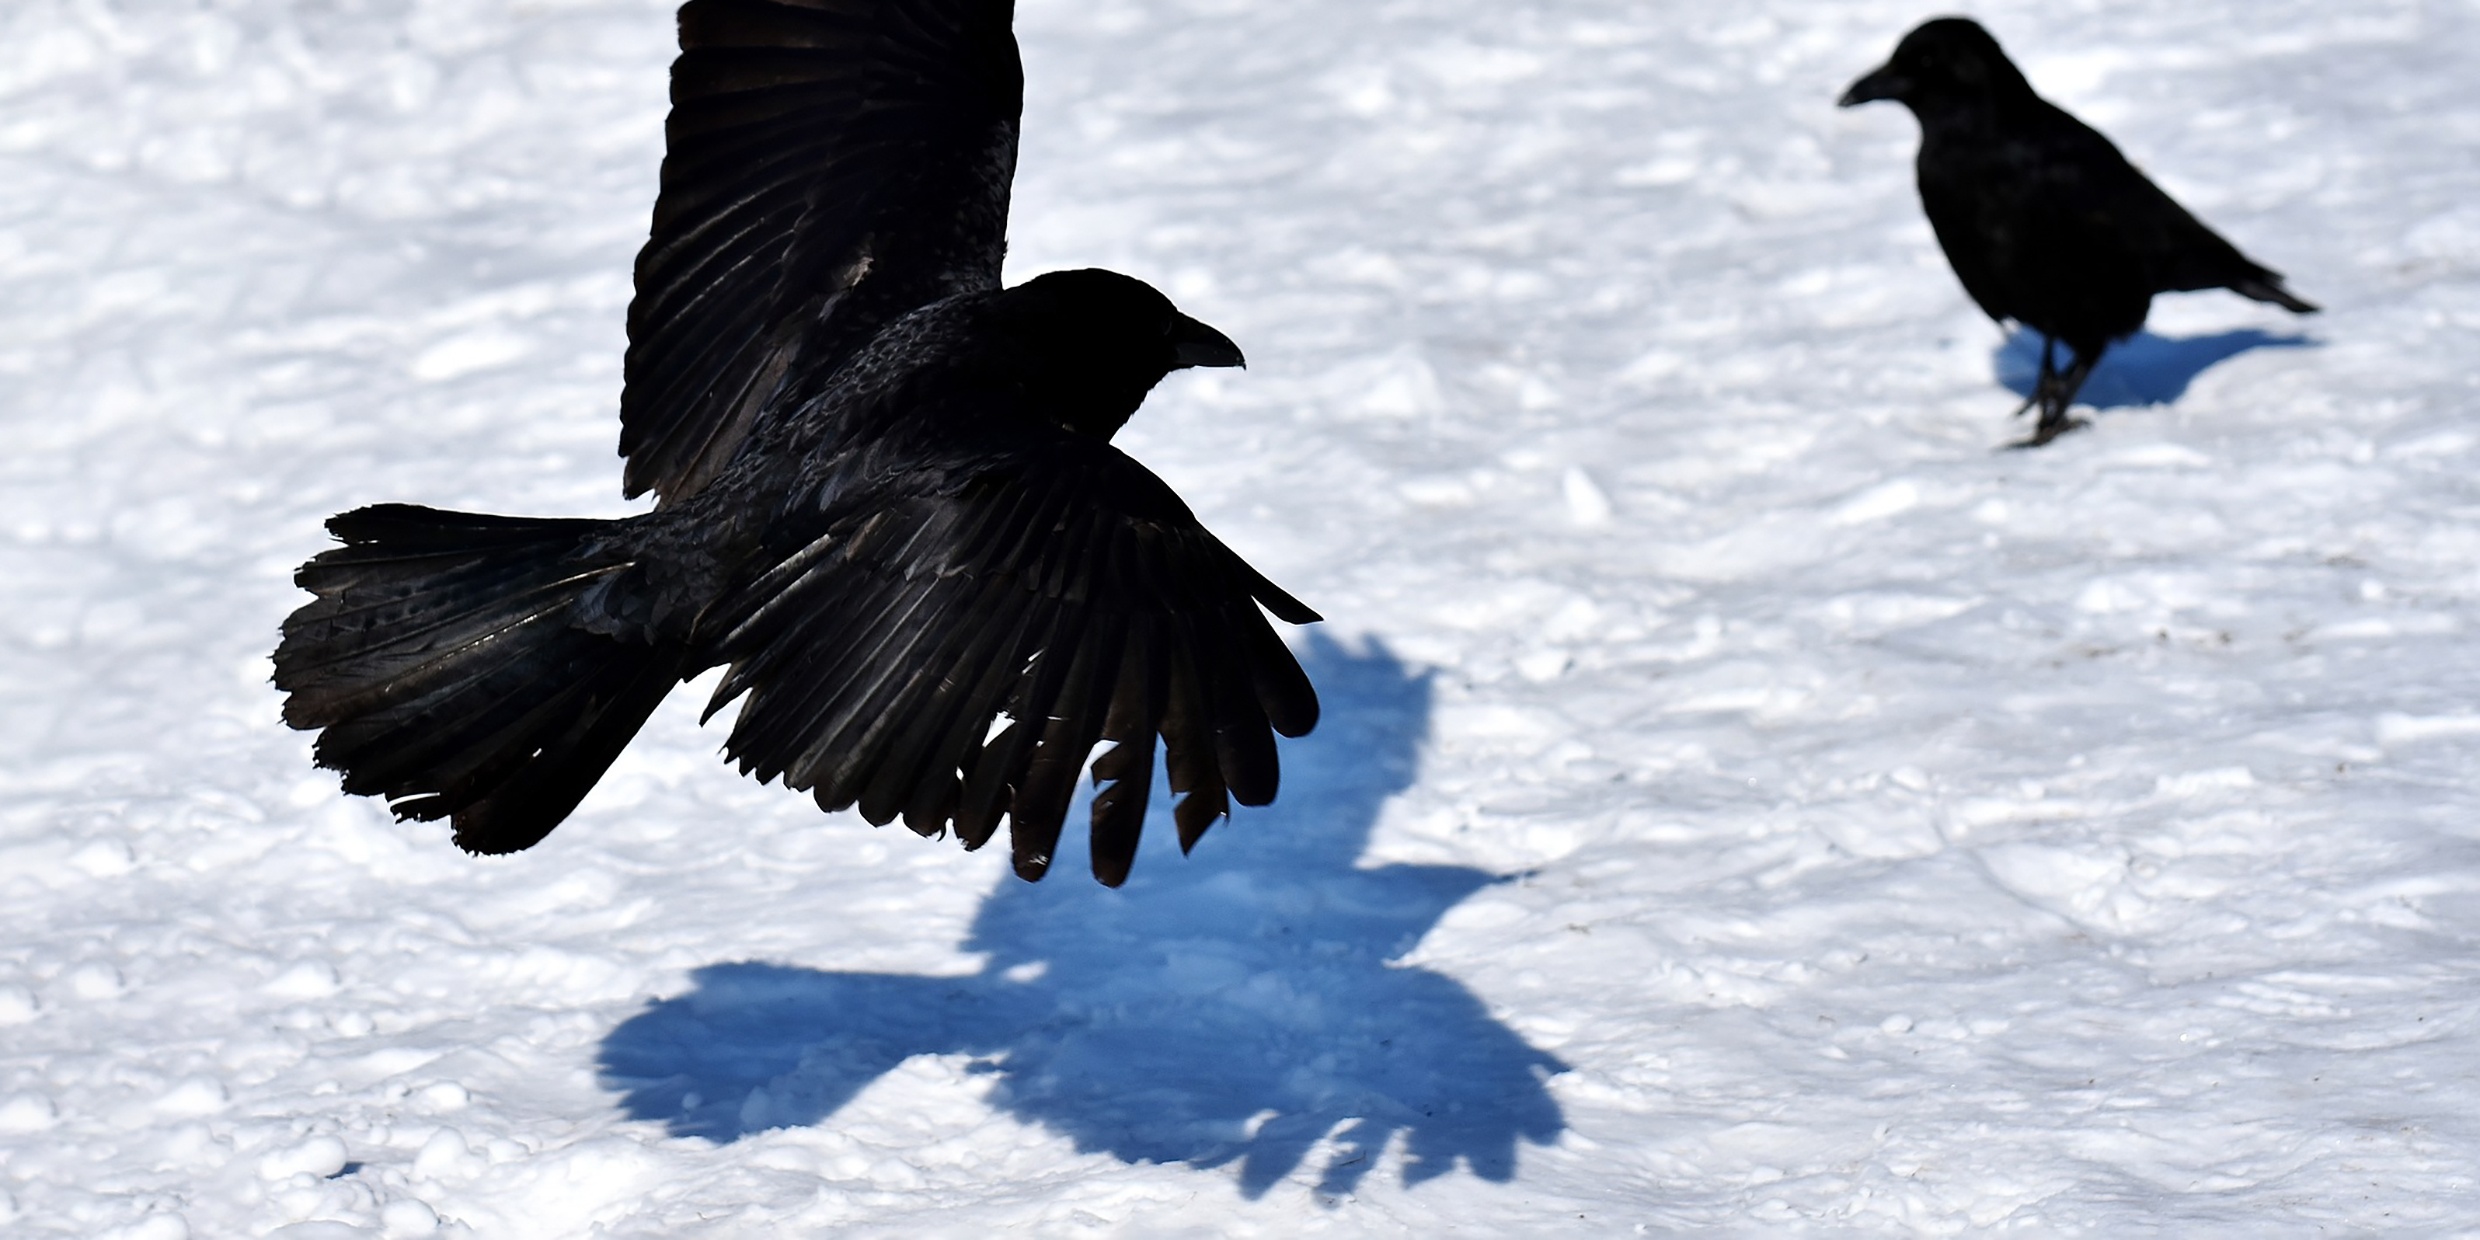 Image of raven taking off from snow-covered ground